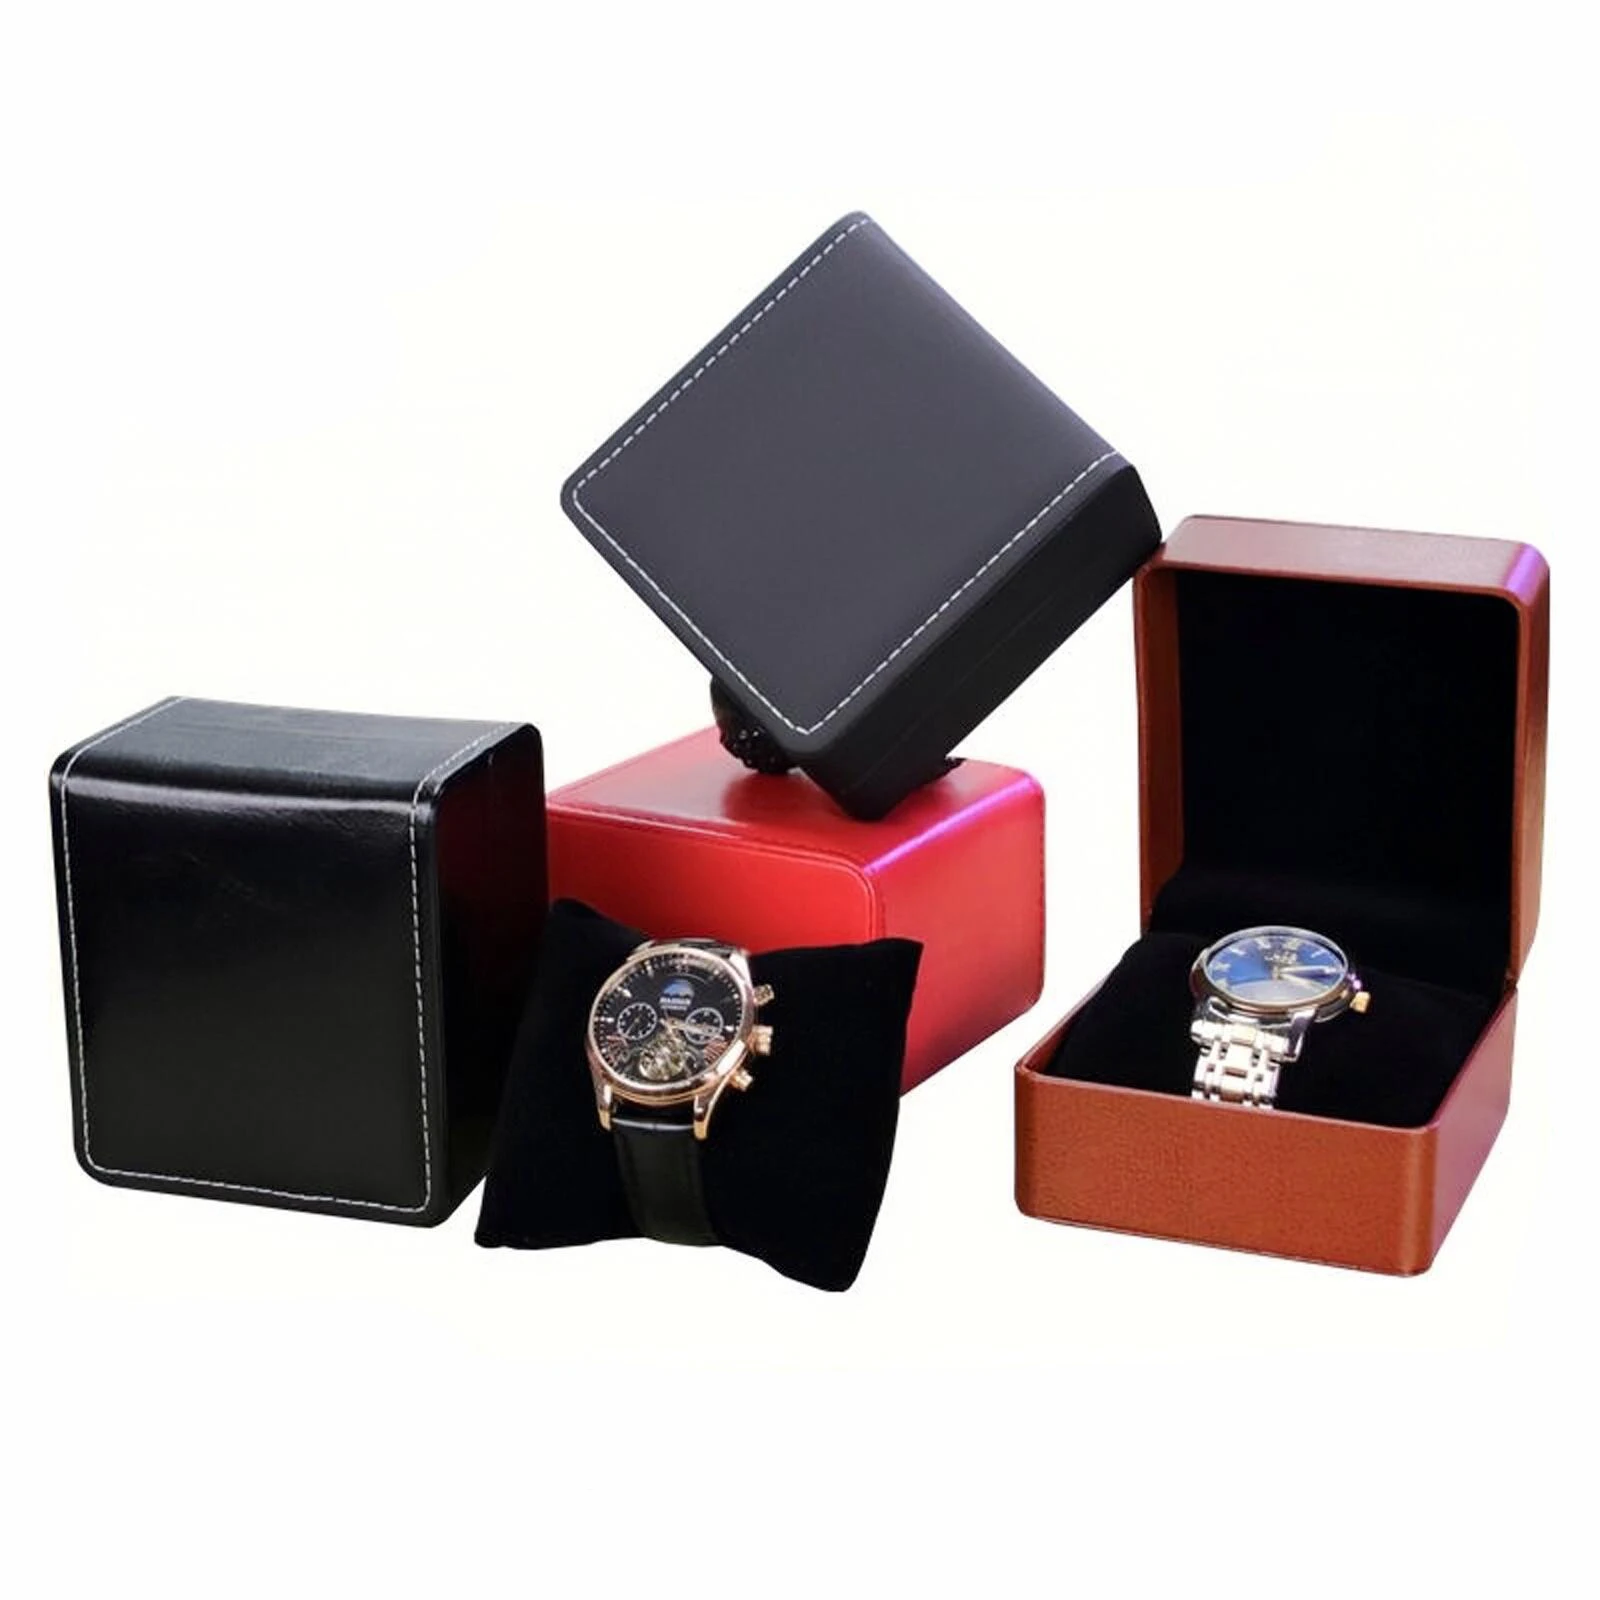 Luxury Pu Leather Watch Box Case Holder Organizer Display Box Black Bracelet Jewelry Boxes Storage For Woman Man Best Gift best for gift blank grade square brown wood glossy luxury gift watch boxes display for storage box watches alibaba factory